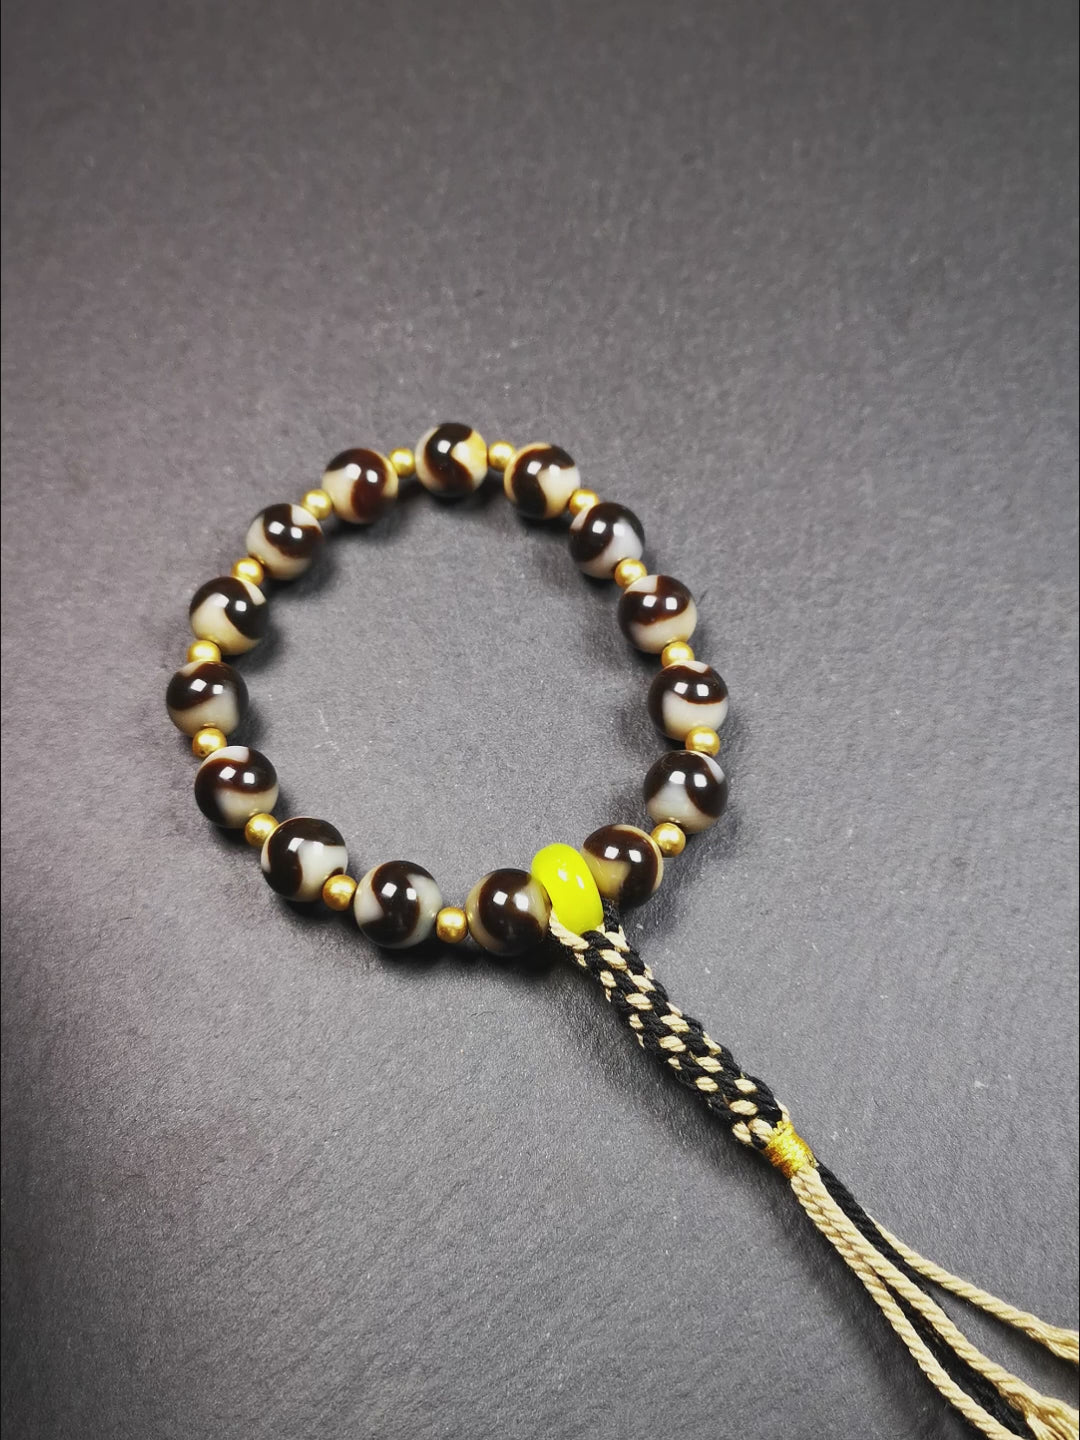 This tiger tooth dzi bracelet was hand-woven by Tibetans from Baiyu County,Tibet. It consists of 15 tiger tooth dzi beads and 15 spacer beads,tie with elastic cord to fit your wrist.  Dzi beads are precious jewelry from Tibetan culture which are believed to possess the power of bringing good fortune to the owners.  You'll get 1 dzi bracelet as pictures shown.